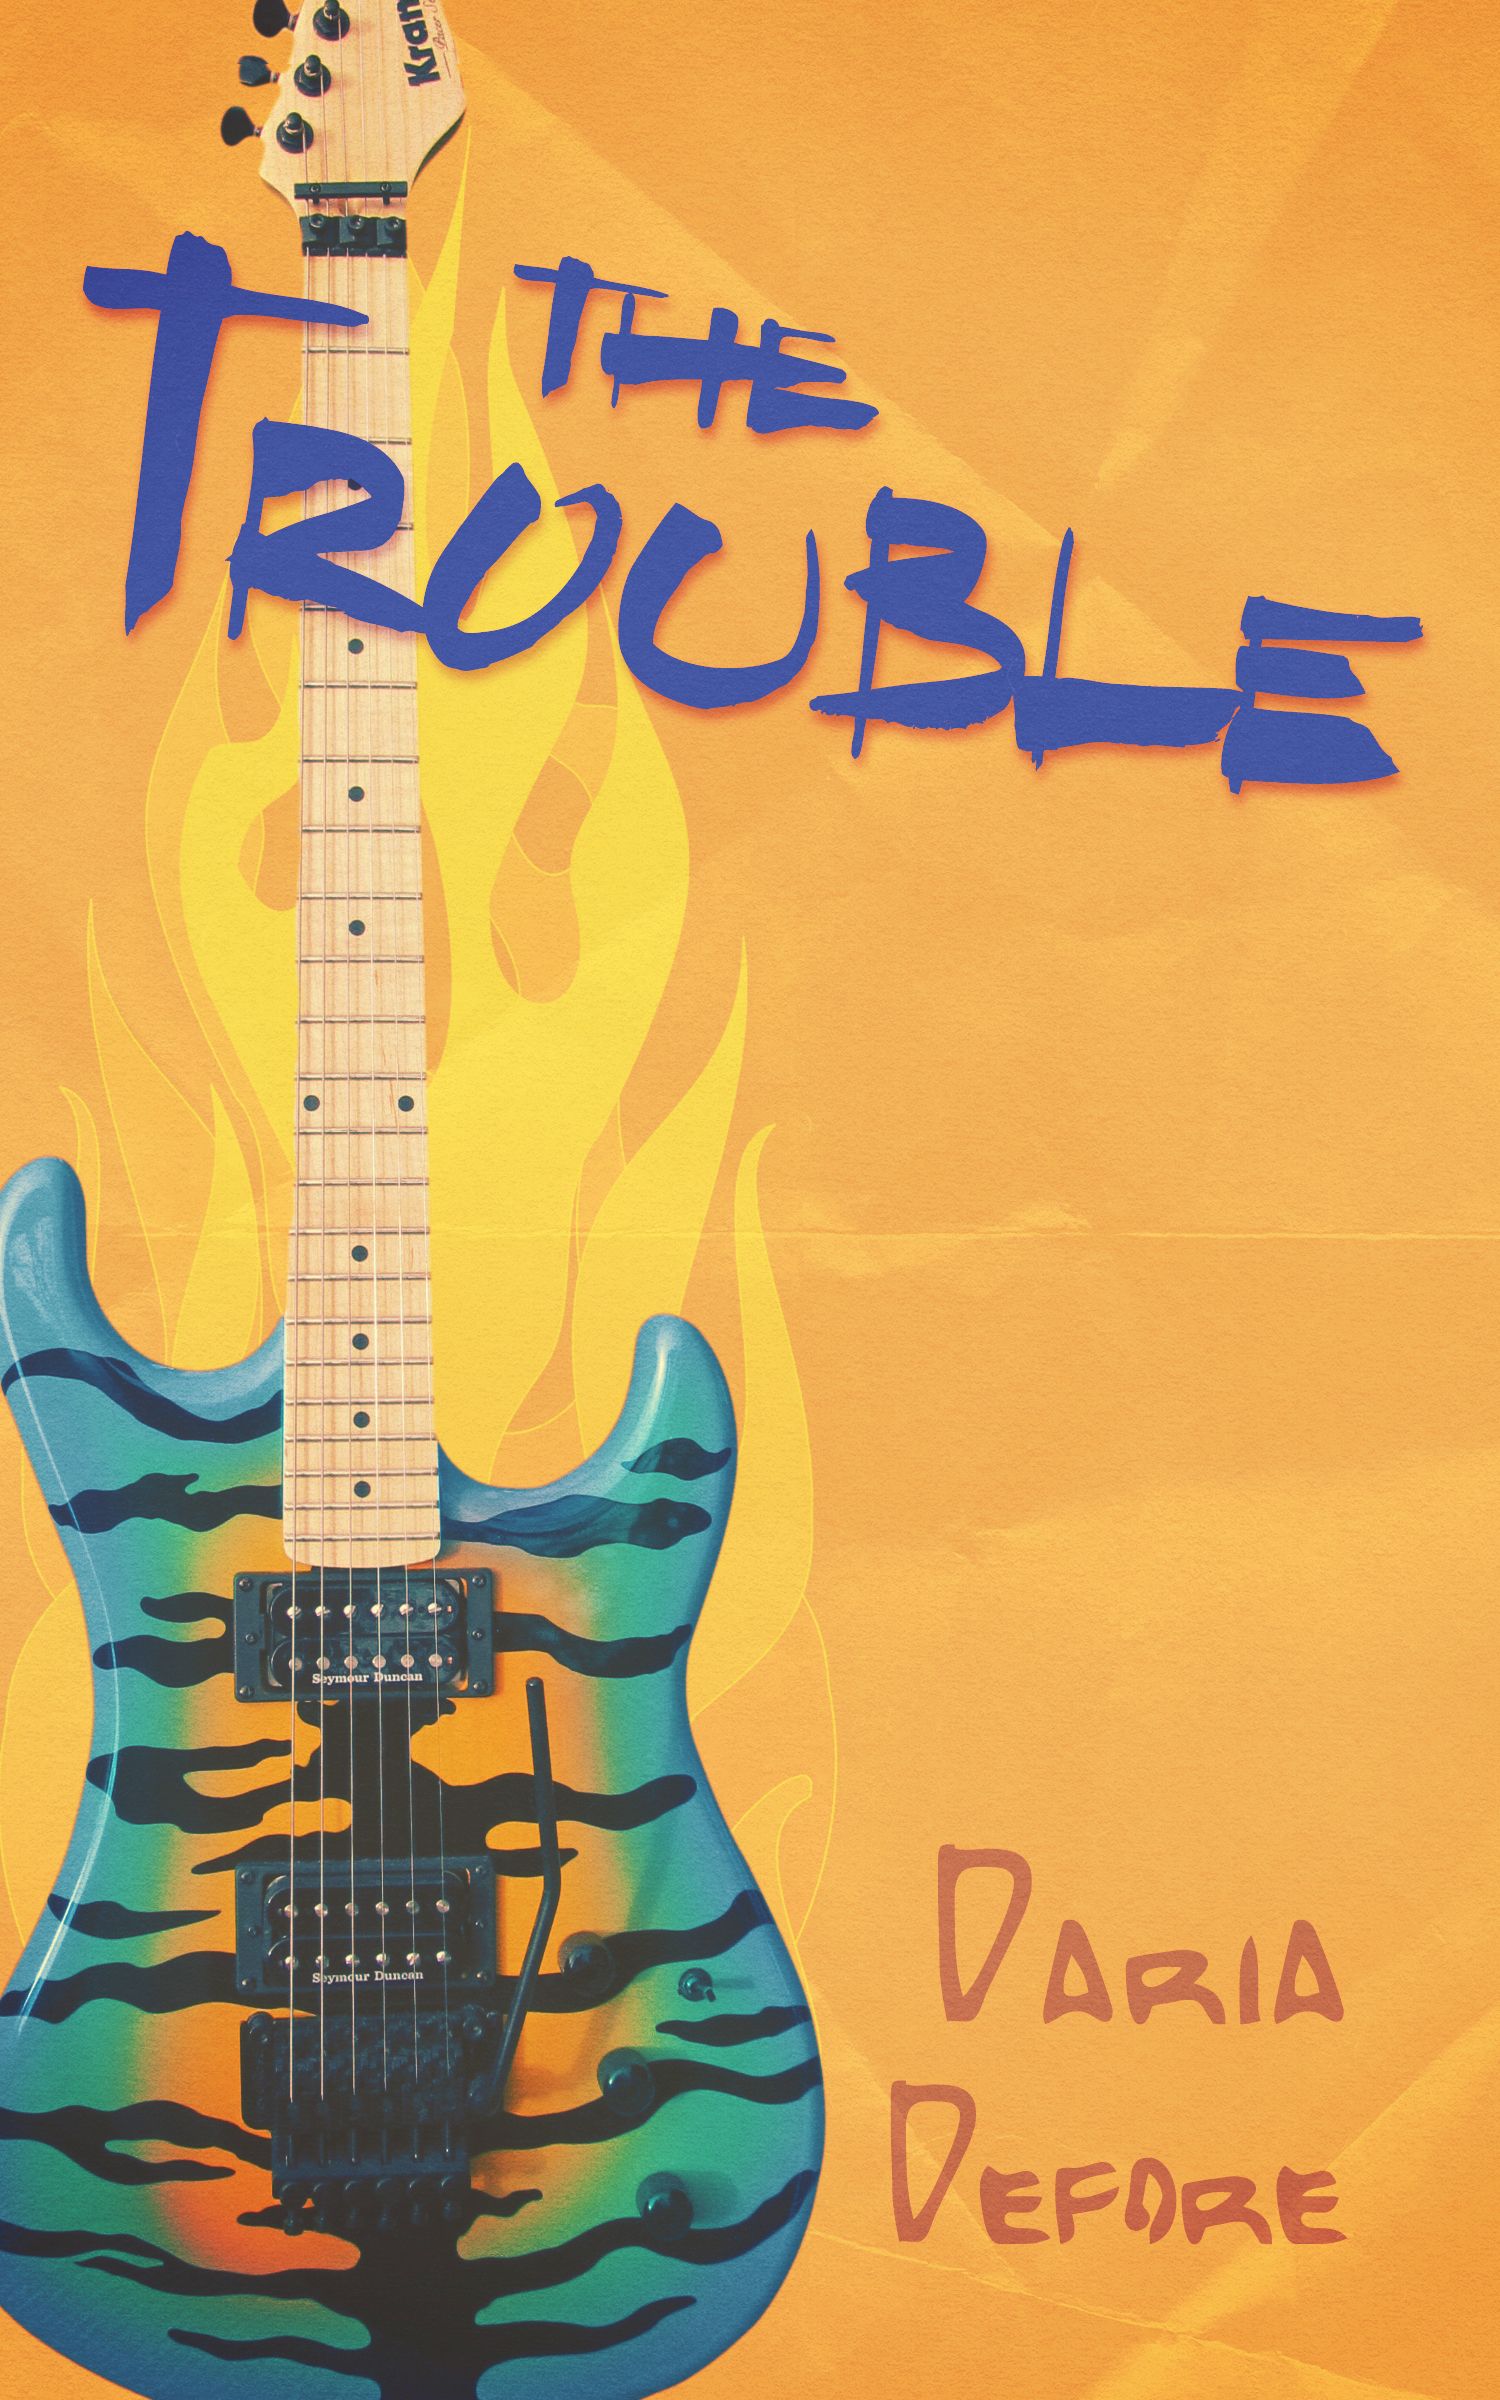 The Trouble cover